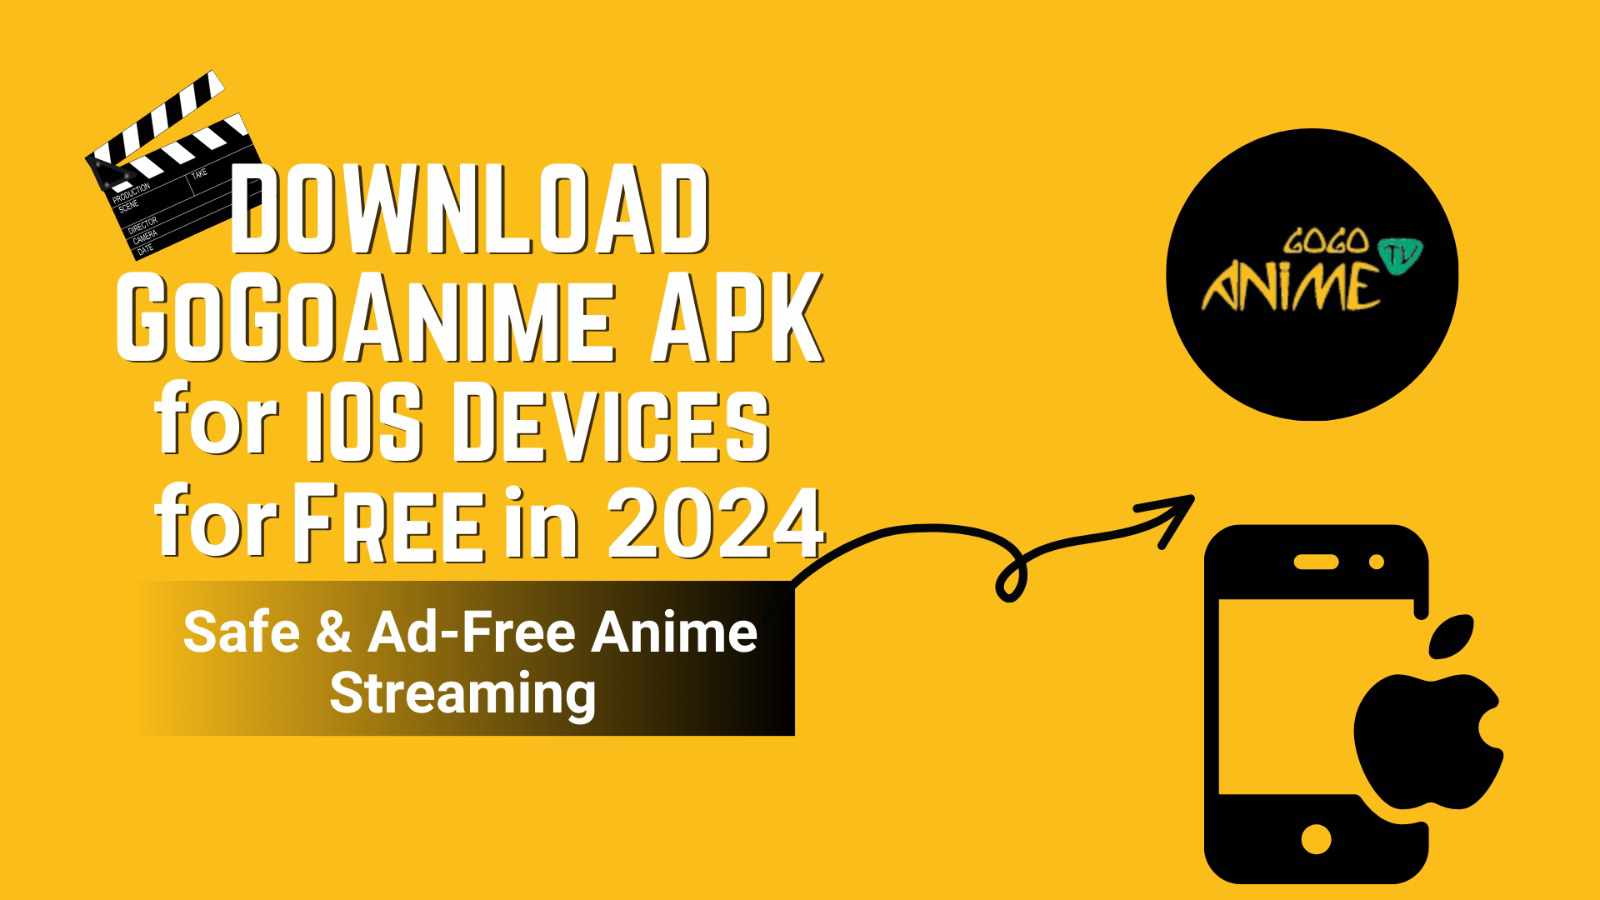 Download Gogoanime APK for iOS Devices for Free in 2024